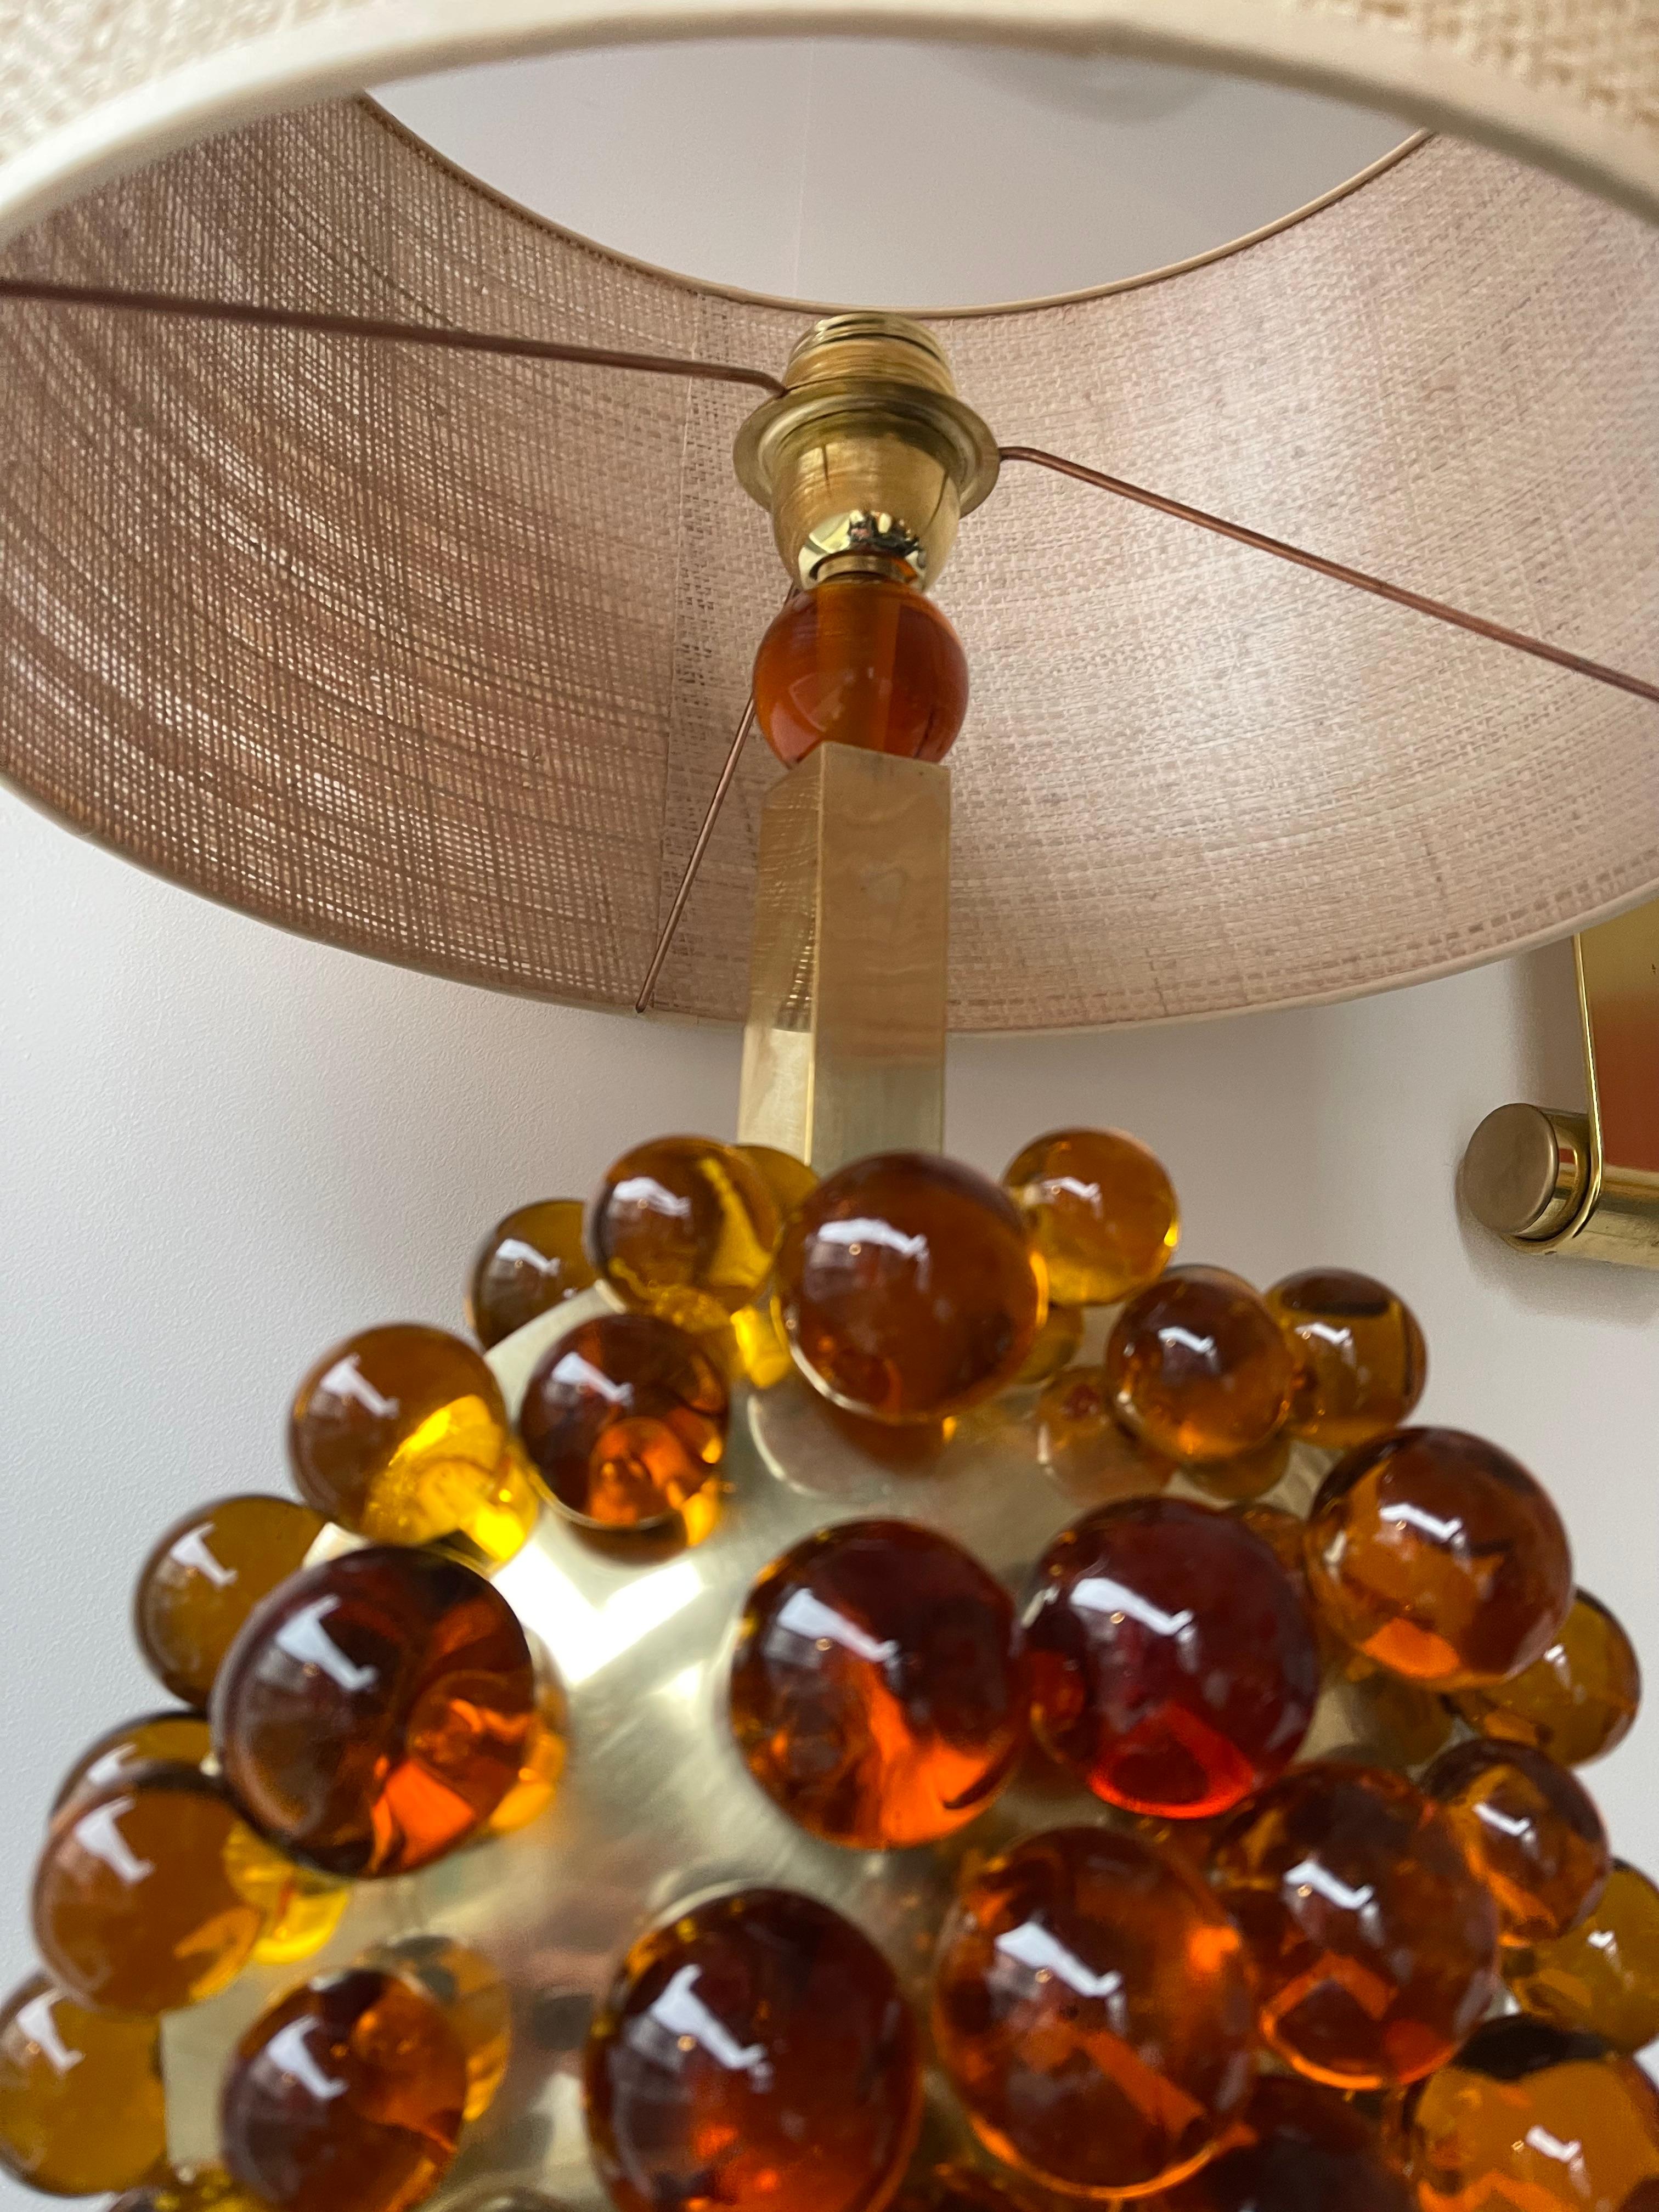 Pair of table or bedside brass lamps amber bubble Murano glass. Contemporary work from a small italian artisanal workshop. Made with old stock of glass from the Italian design manufacture Salviati.

Demo shades non included. Measurements in